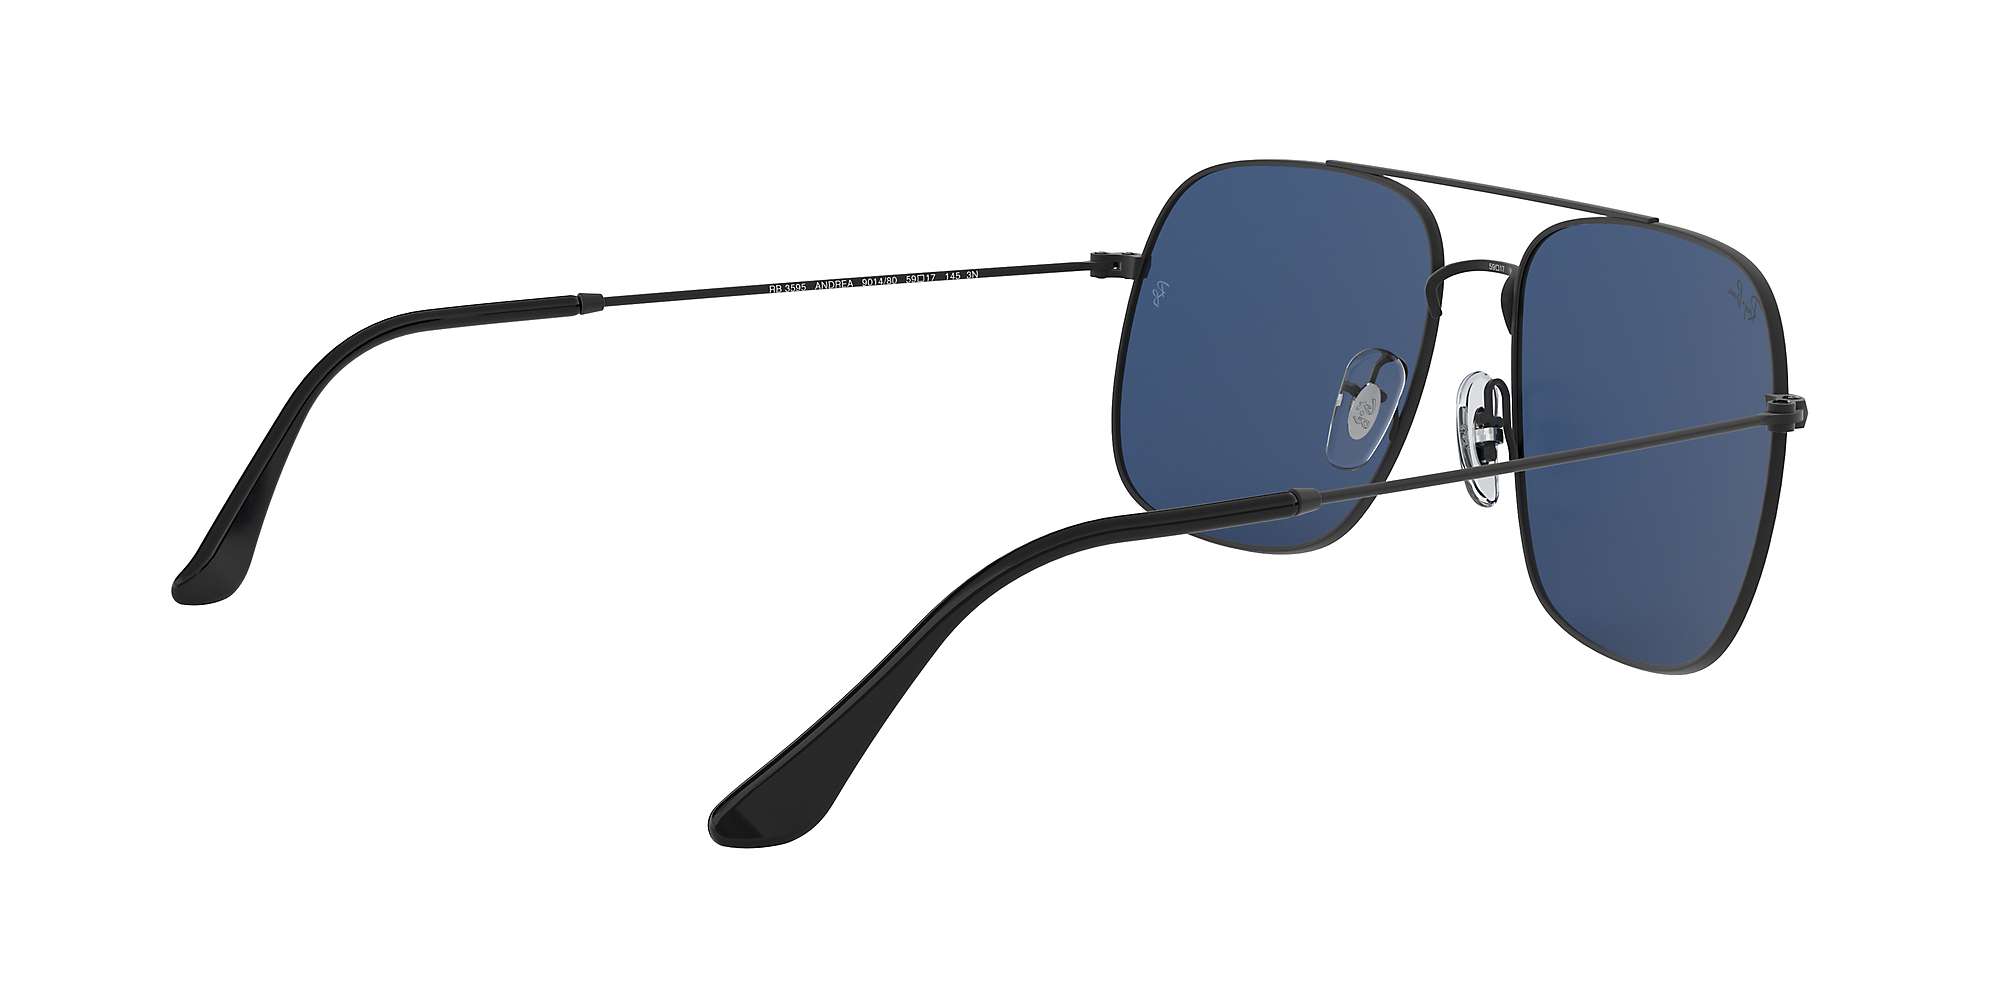 Buy Ray-Ban RB3595 Unisex Andrea Square Sunglasses Online at johnlewis.com